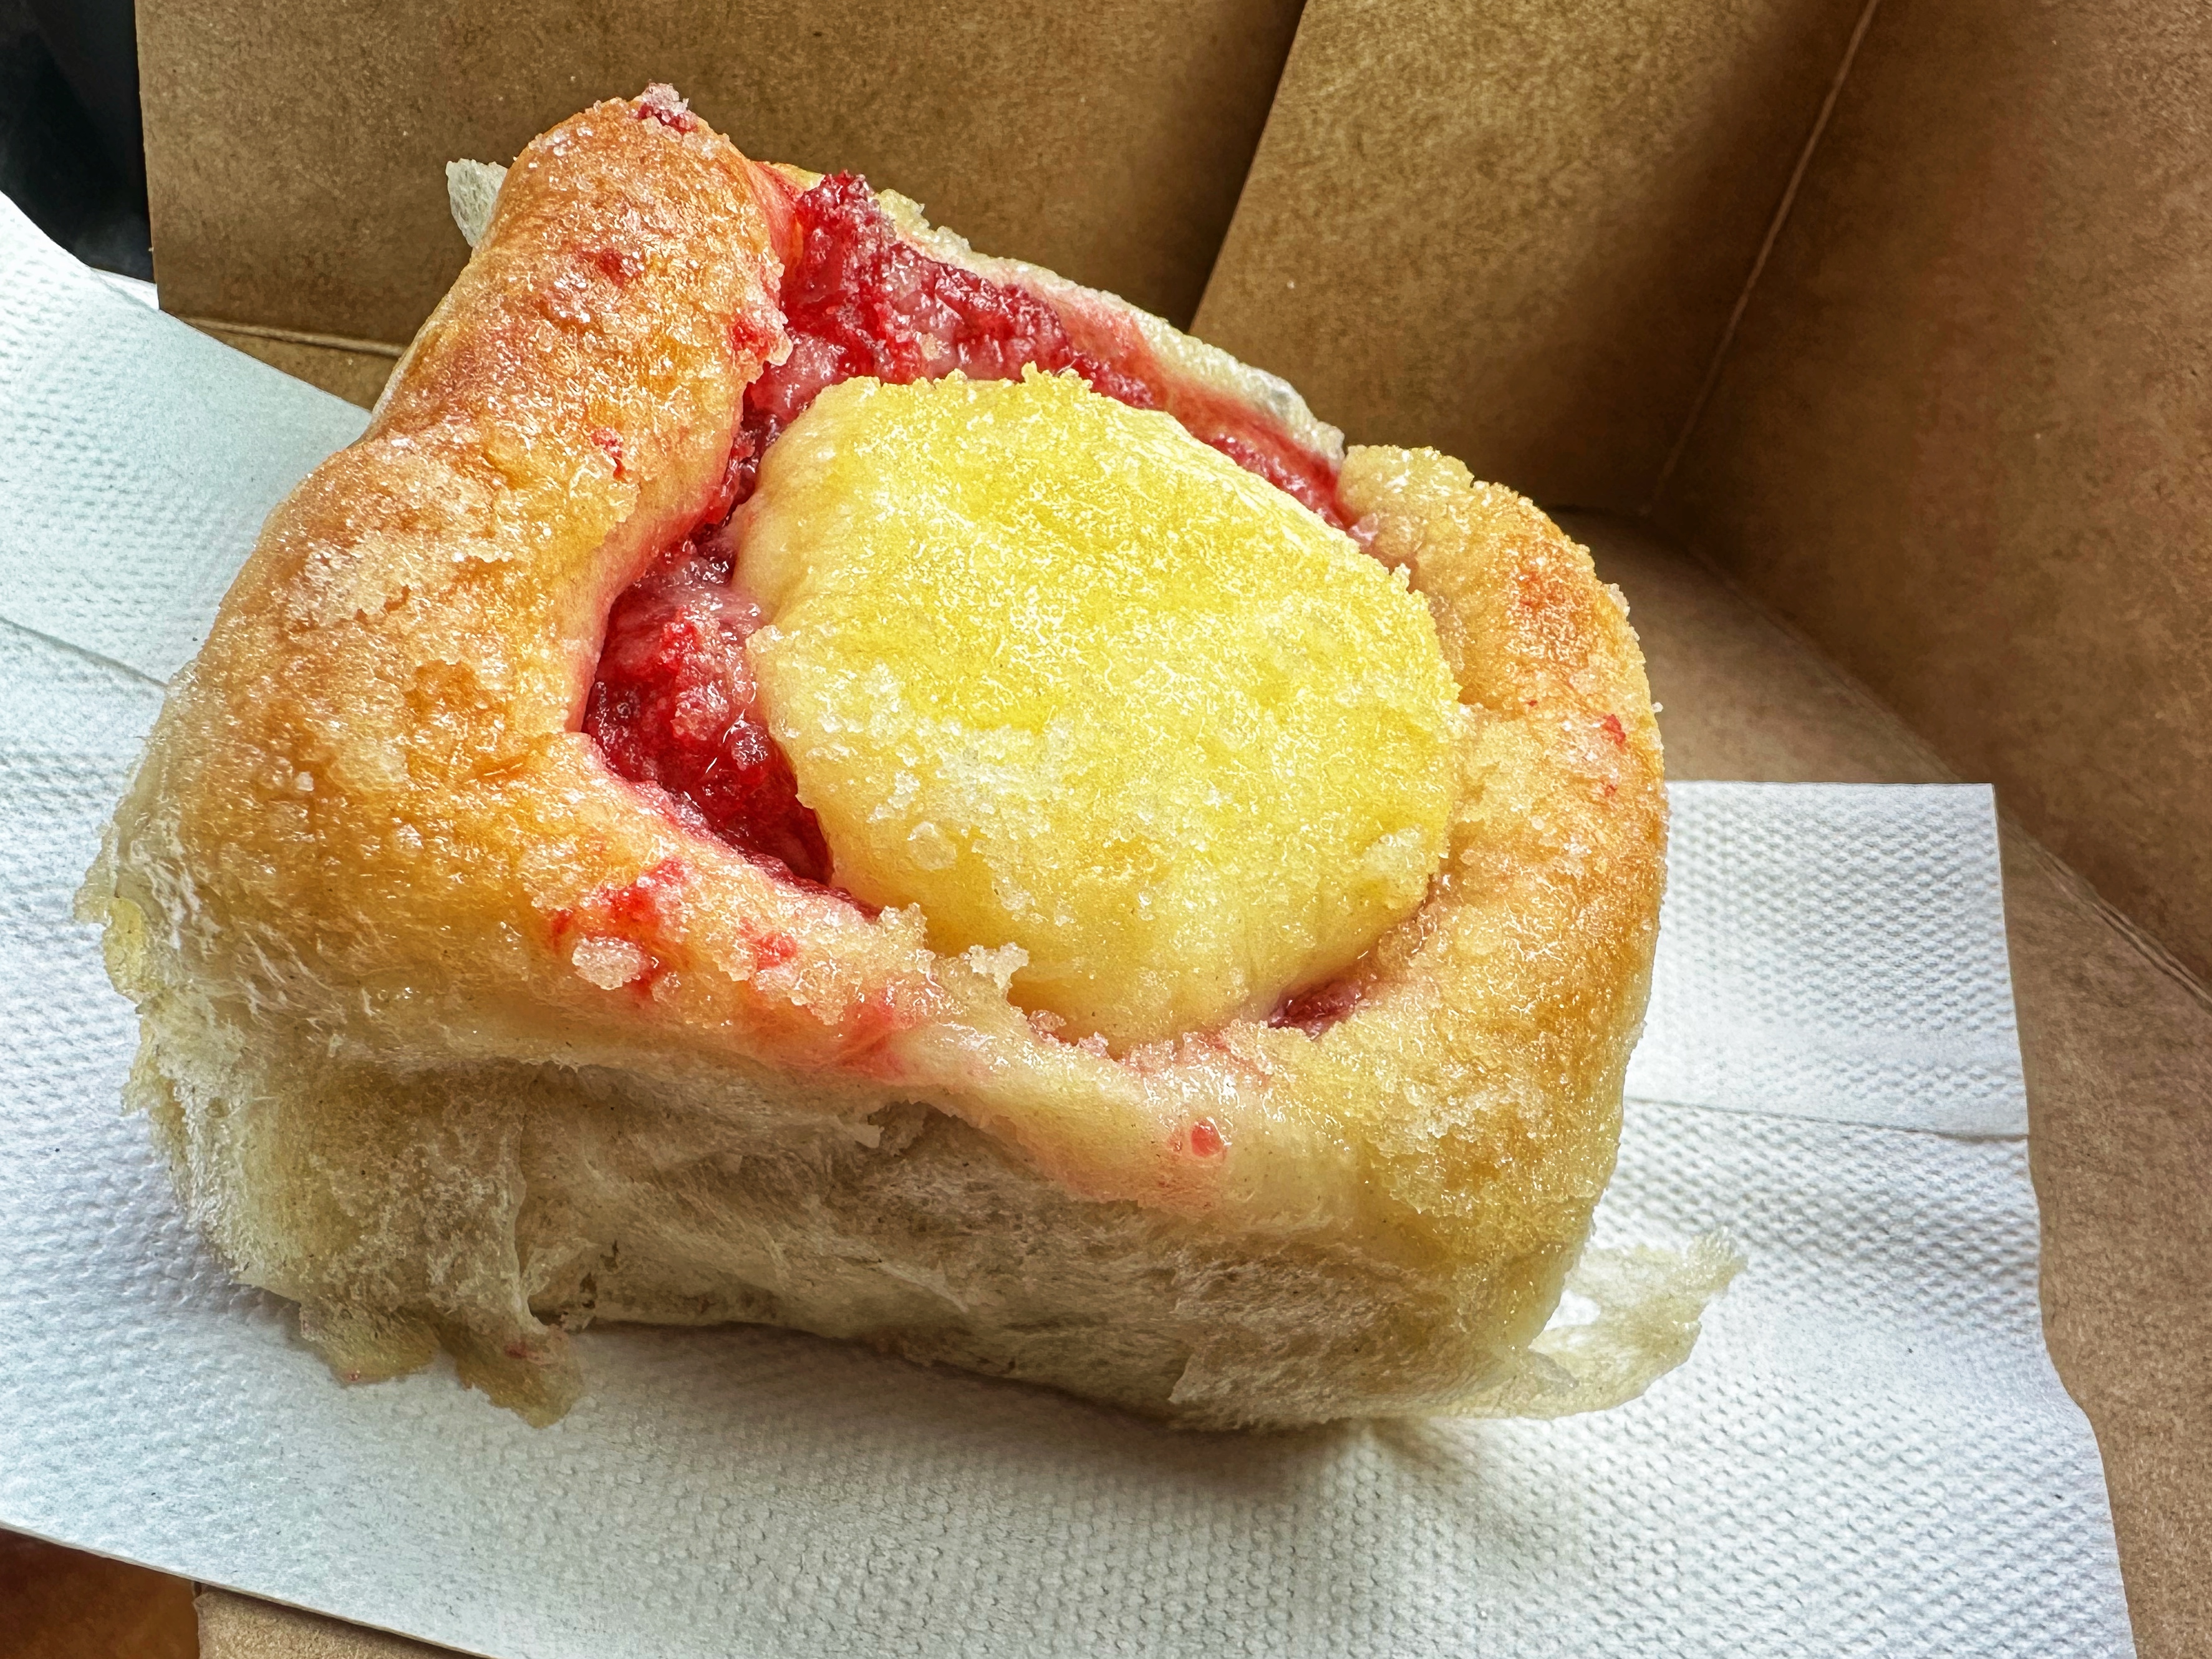 strawberry cream cheese kolache sweet pastry from the Czech Stop in West, Texas